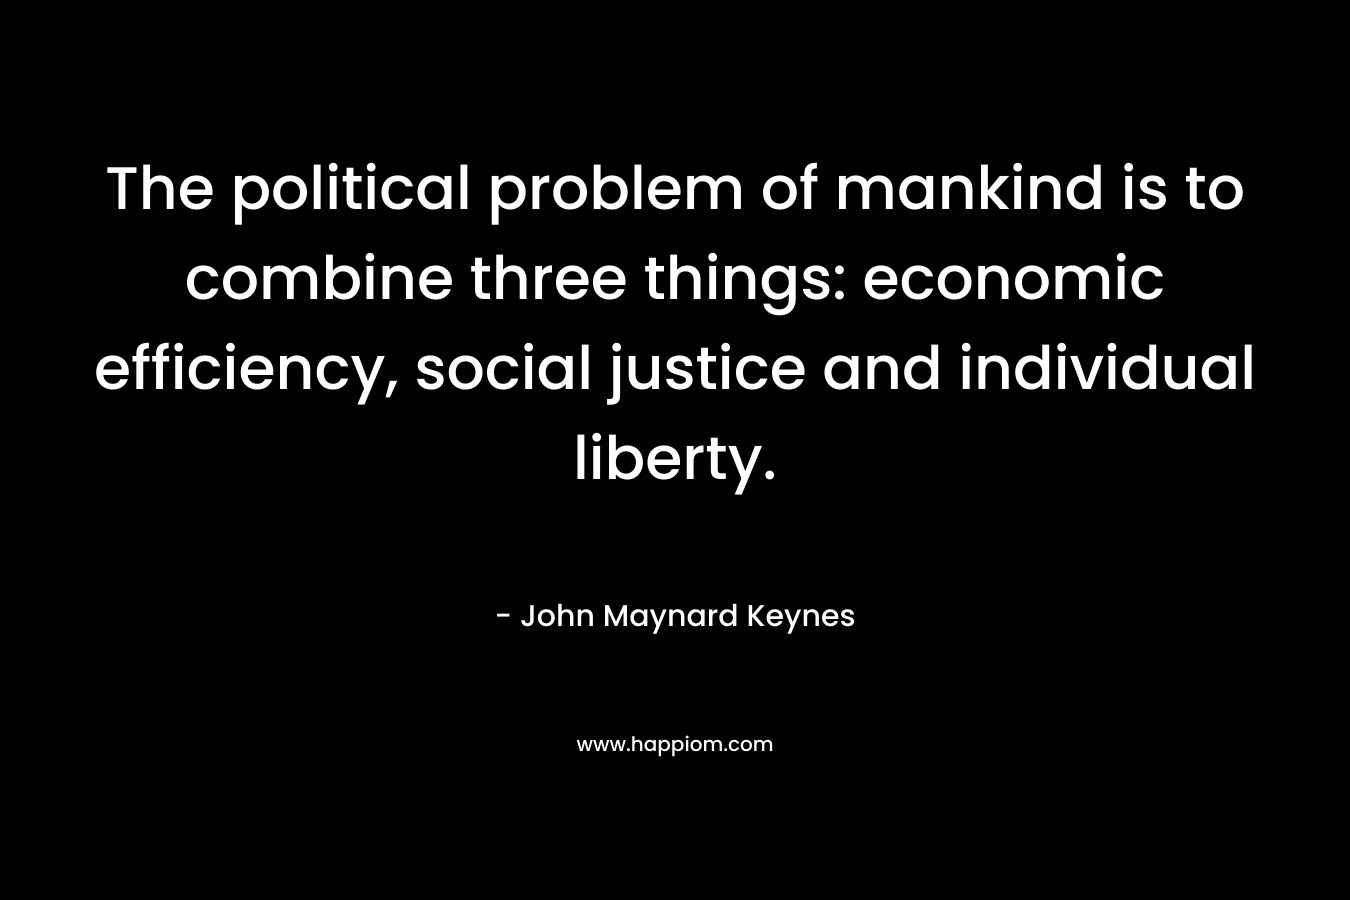 The political problem of mankind is to combine three things: economic efficiency, social justice and individual liberty. – John Maynard Keynes